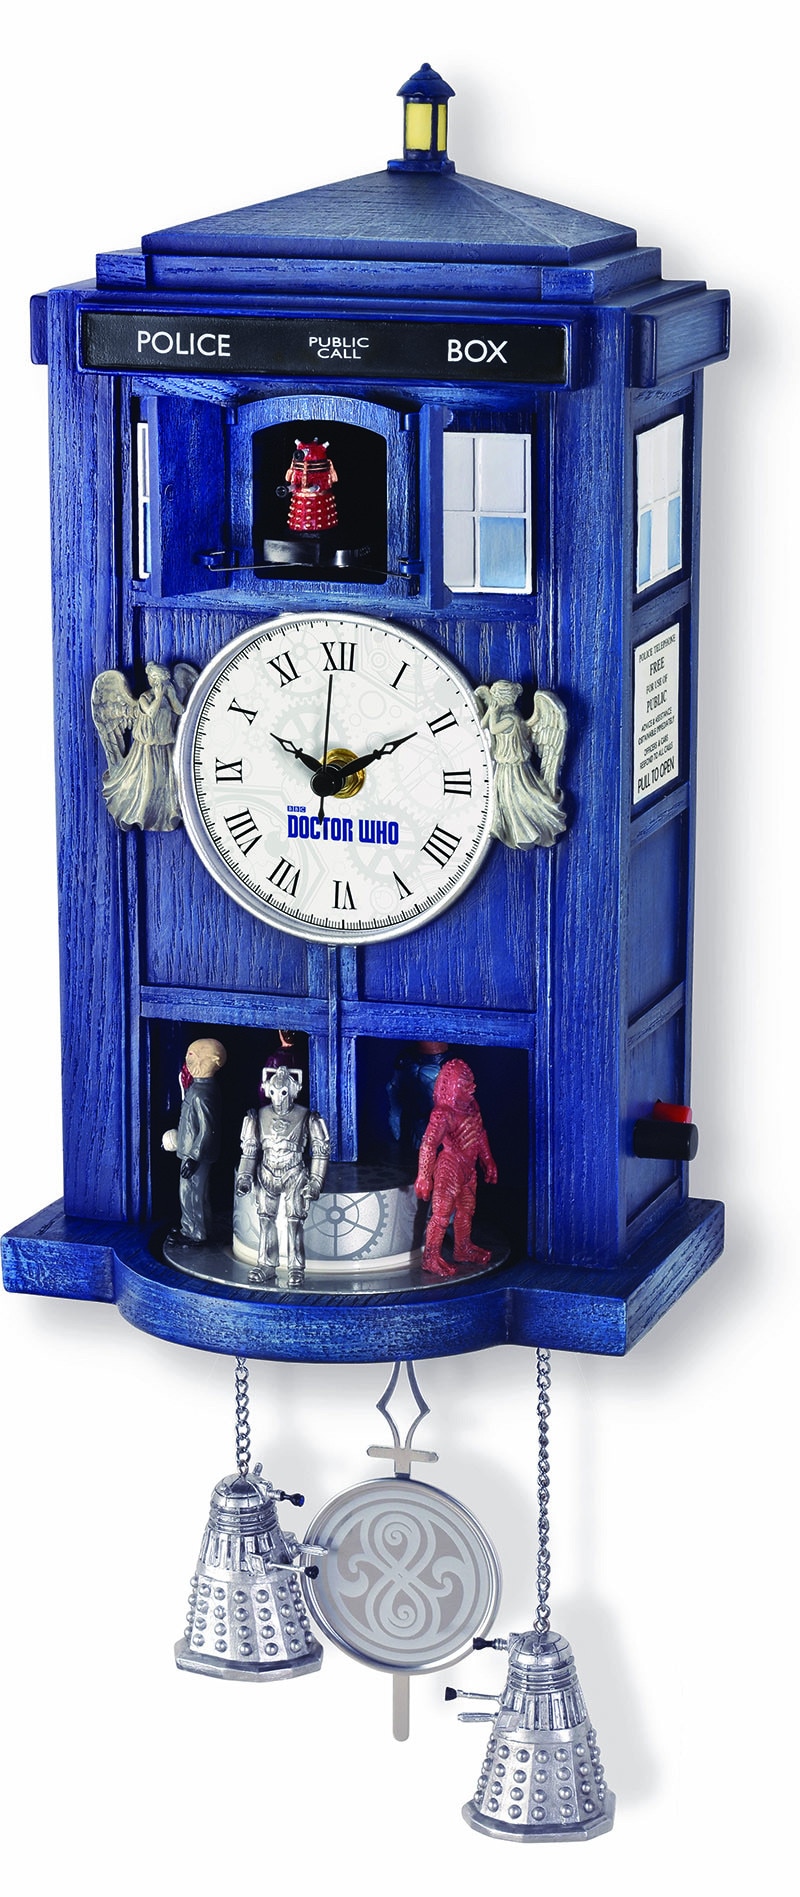 Image of TARDIS clock with mini Doctor Who monsters on